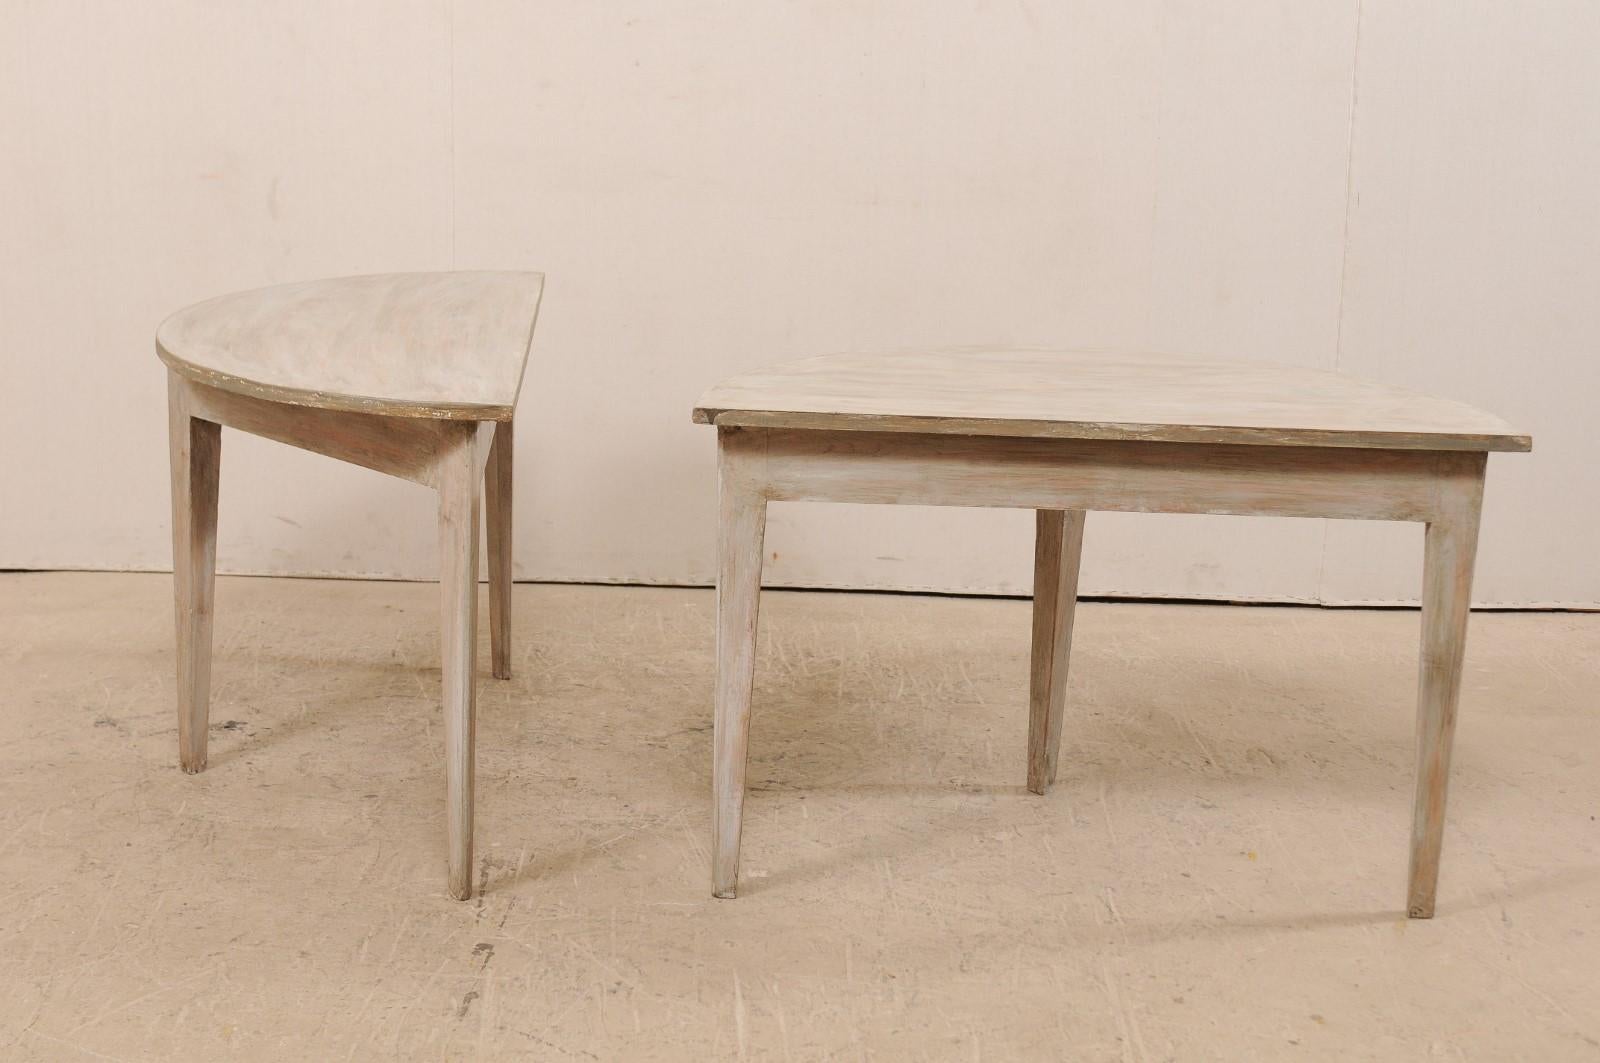 Pair of 19th Century Swedish Painted Wood Demi-lune Tables, circa 1880 (Geschnitzt)